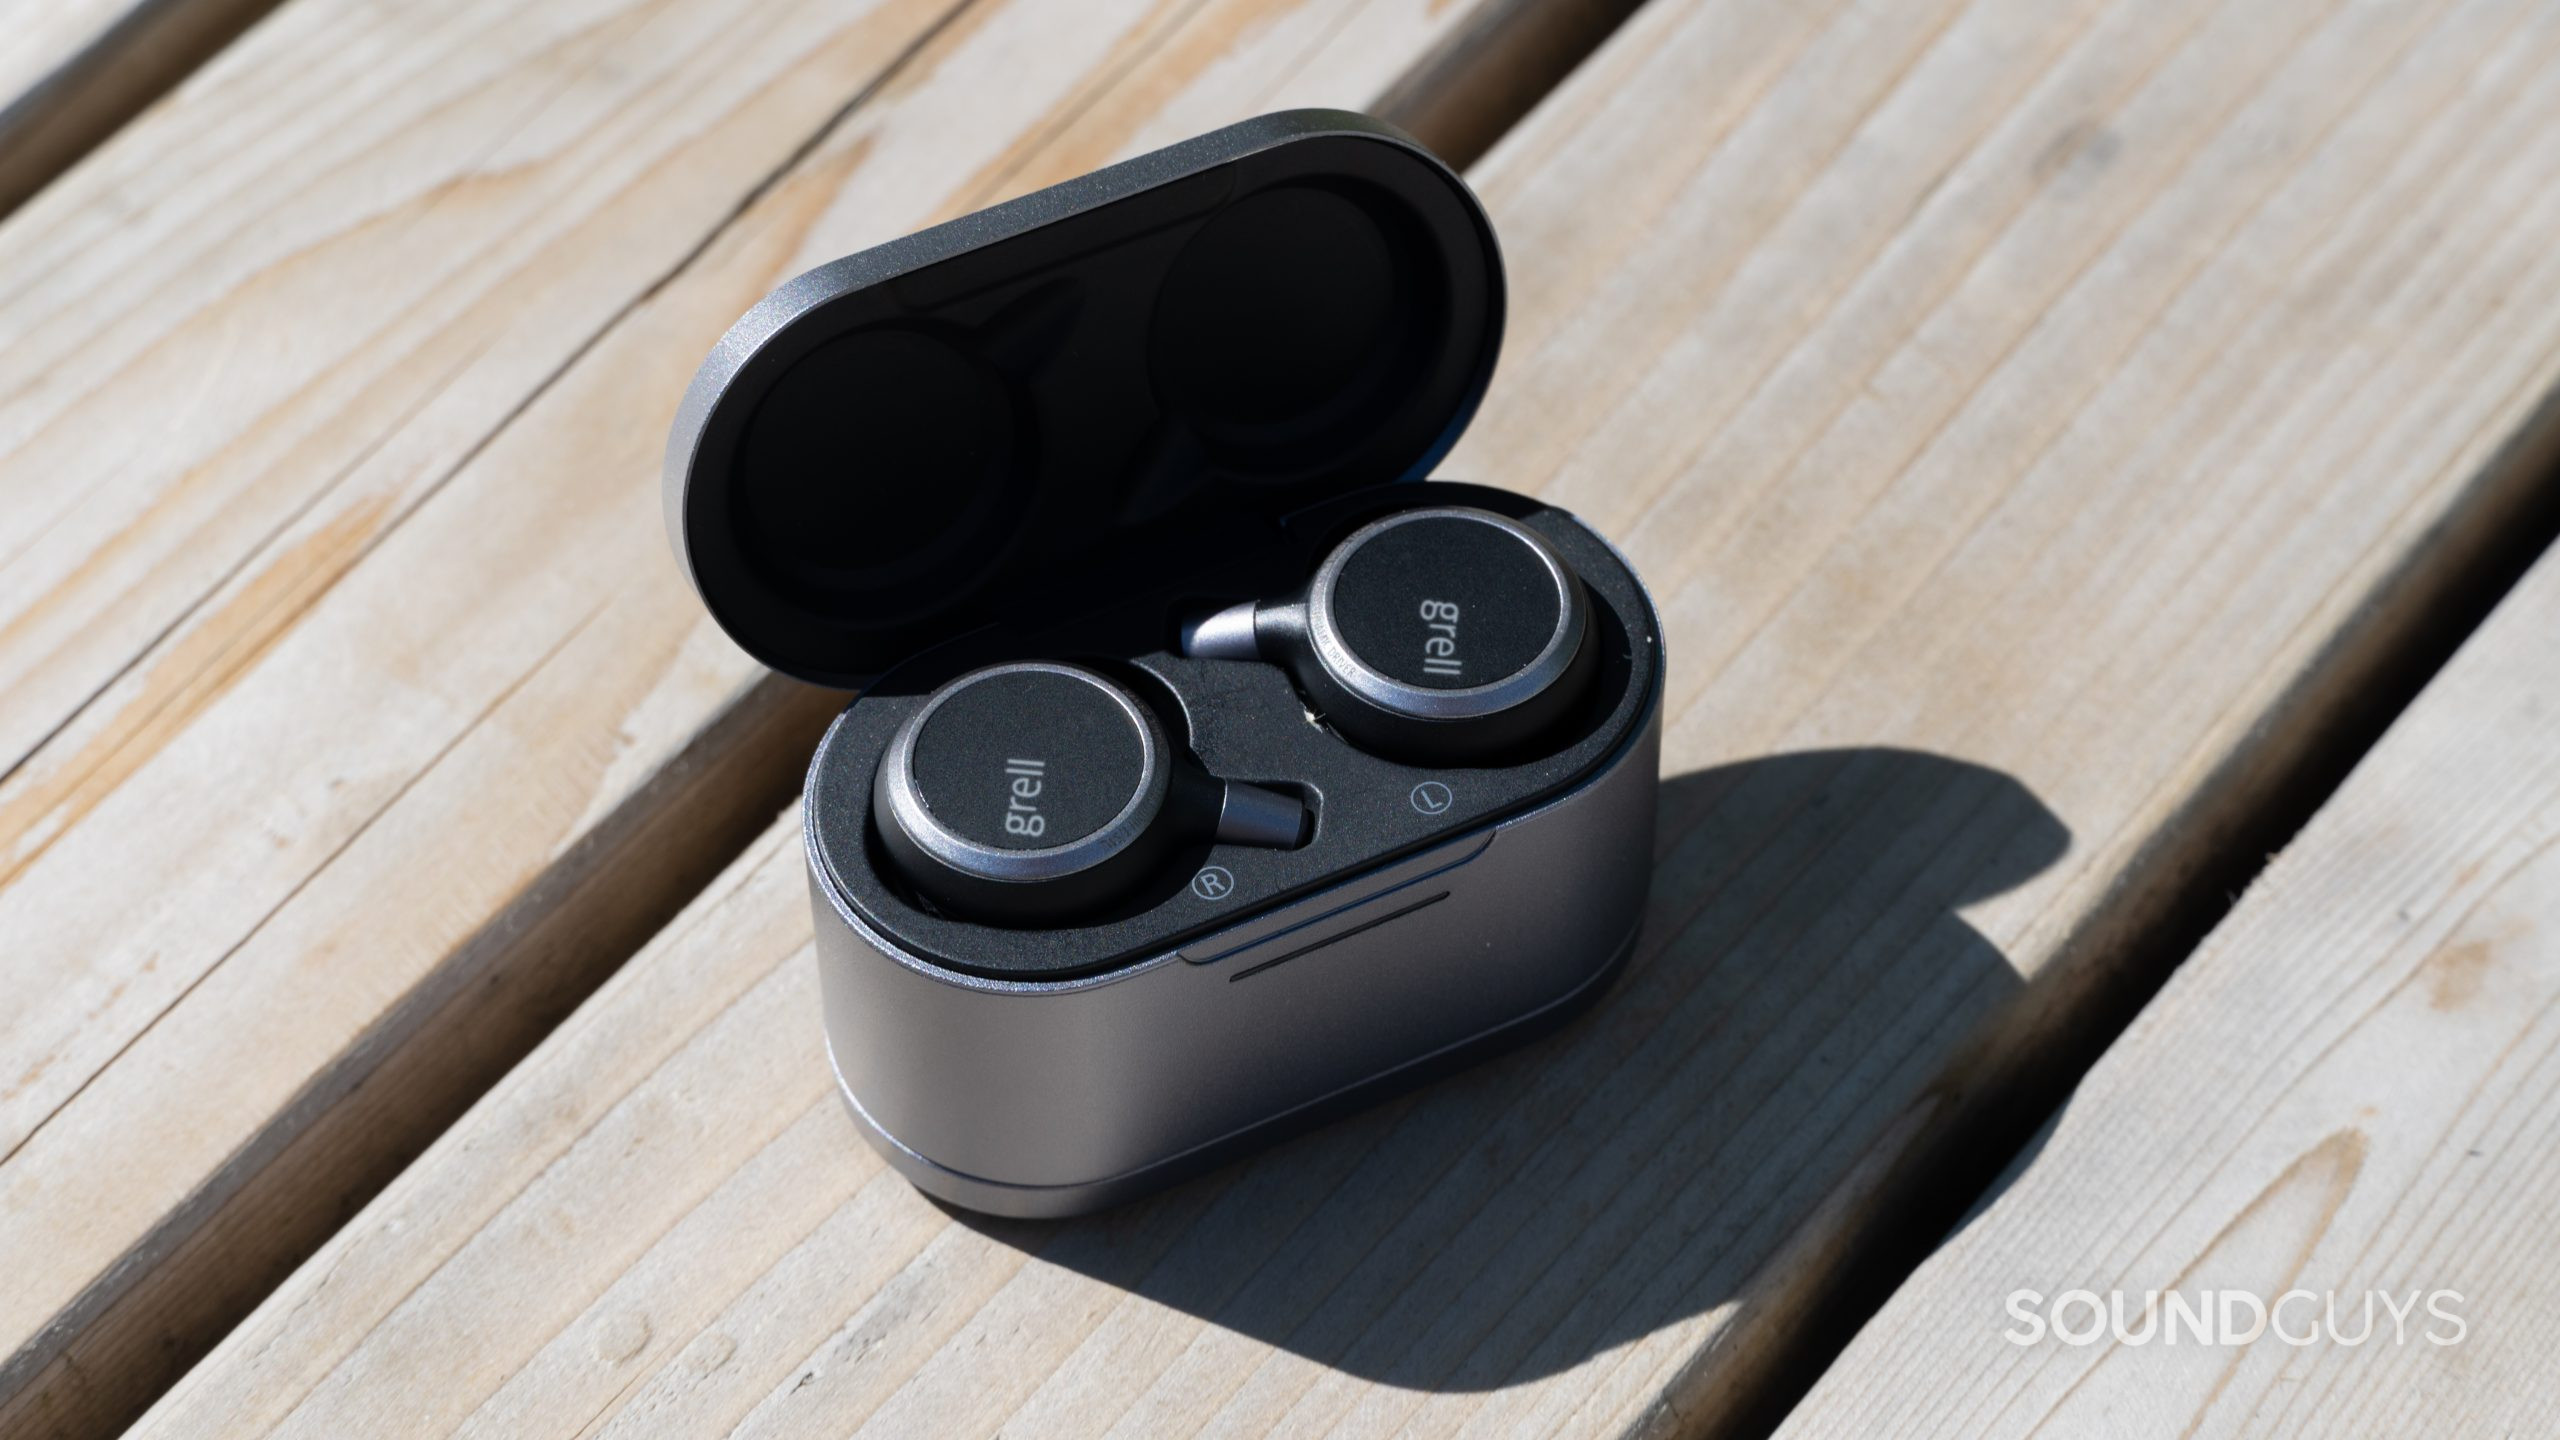 Grell Audio TWS 1 earbuds in case outside